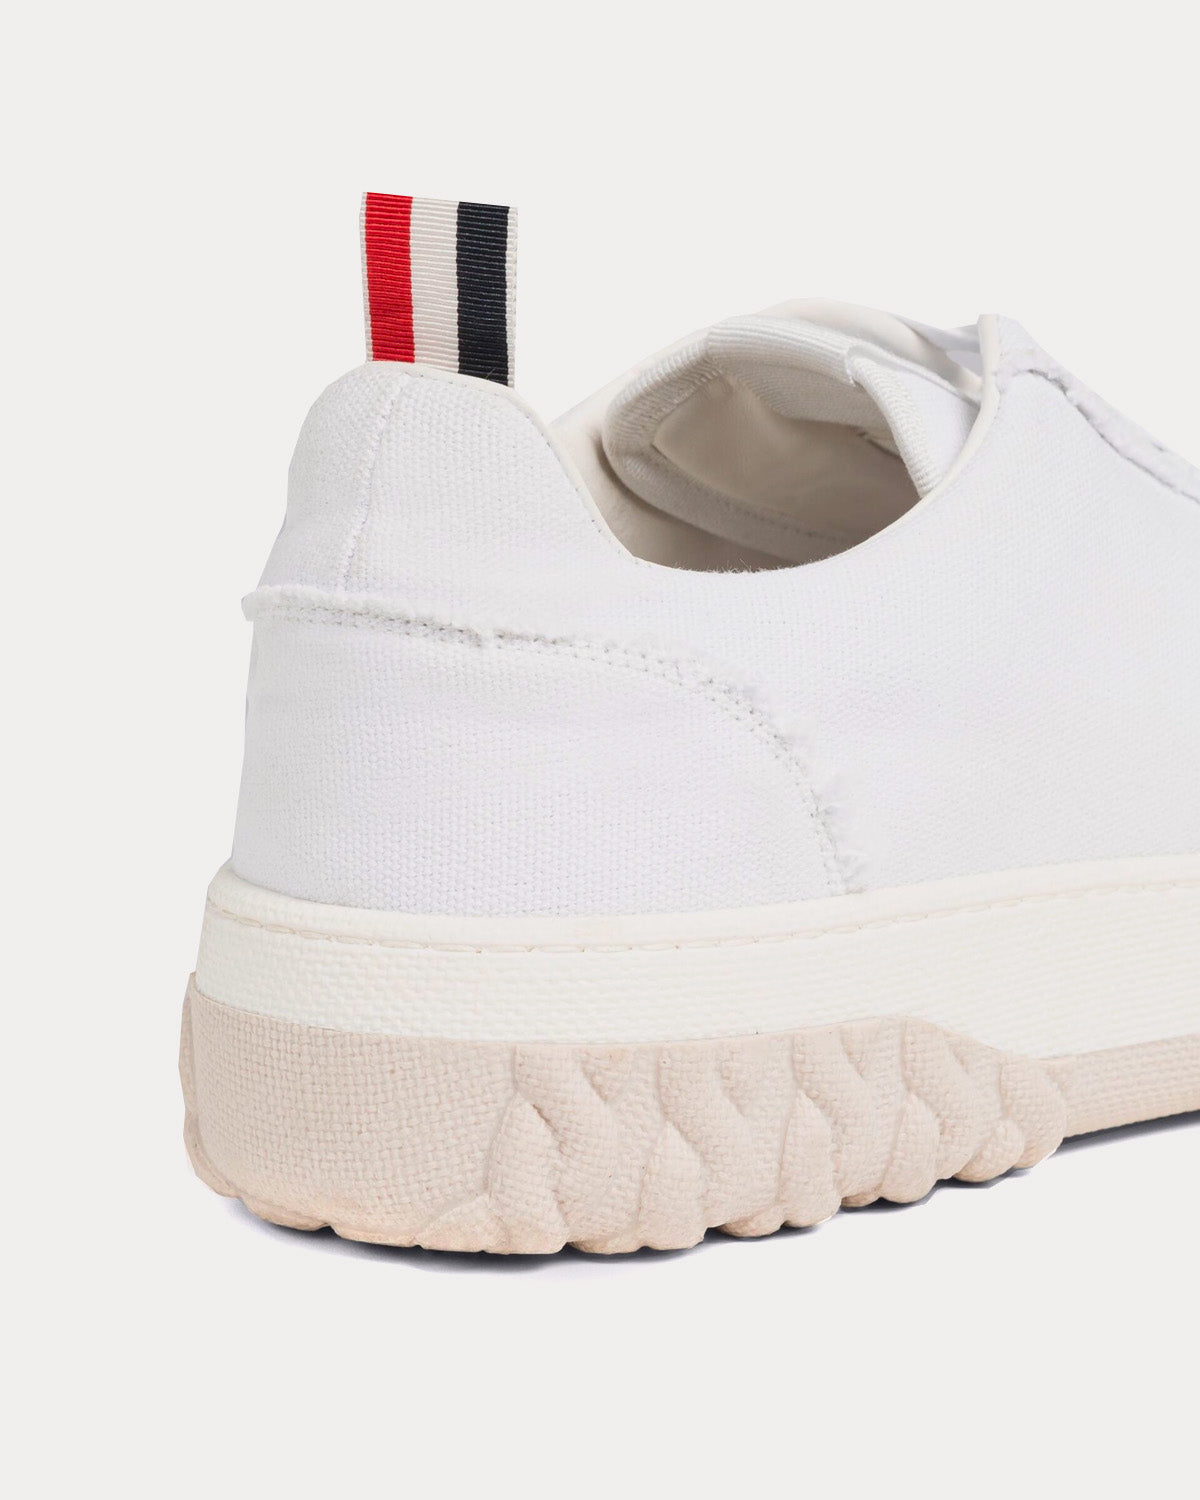 Thom Browne - Field Frayed Canvas & Cable Knit Sole White Low Top Sneakers